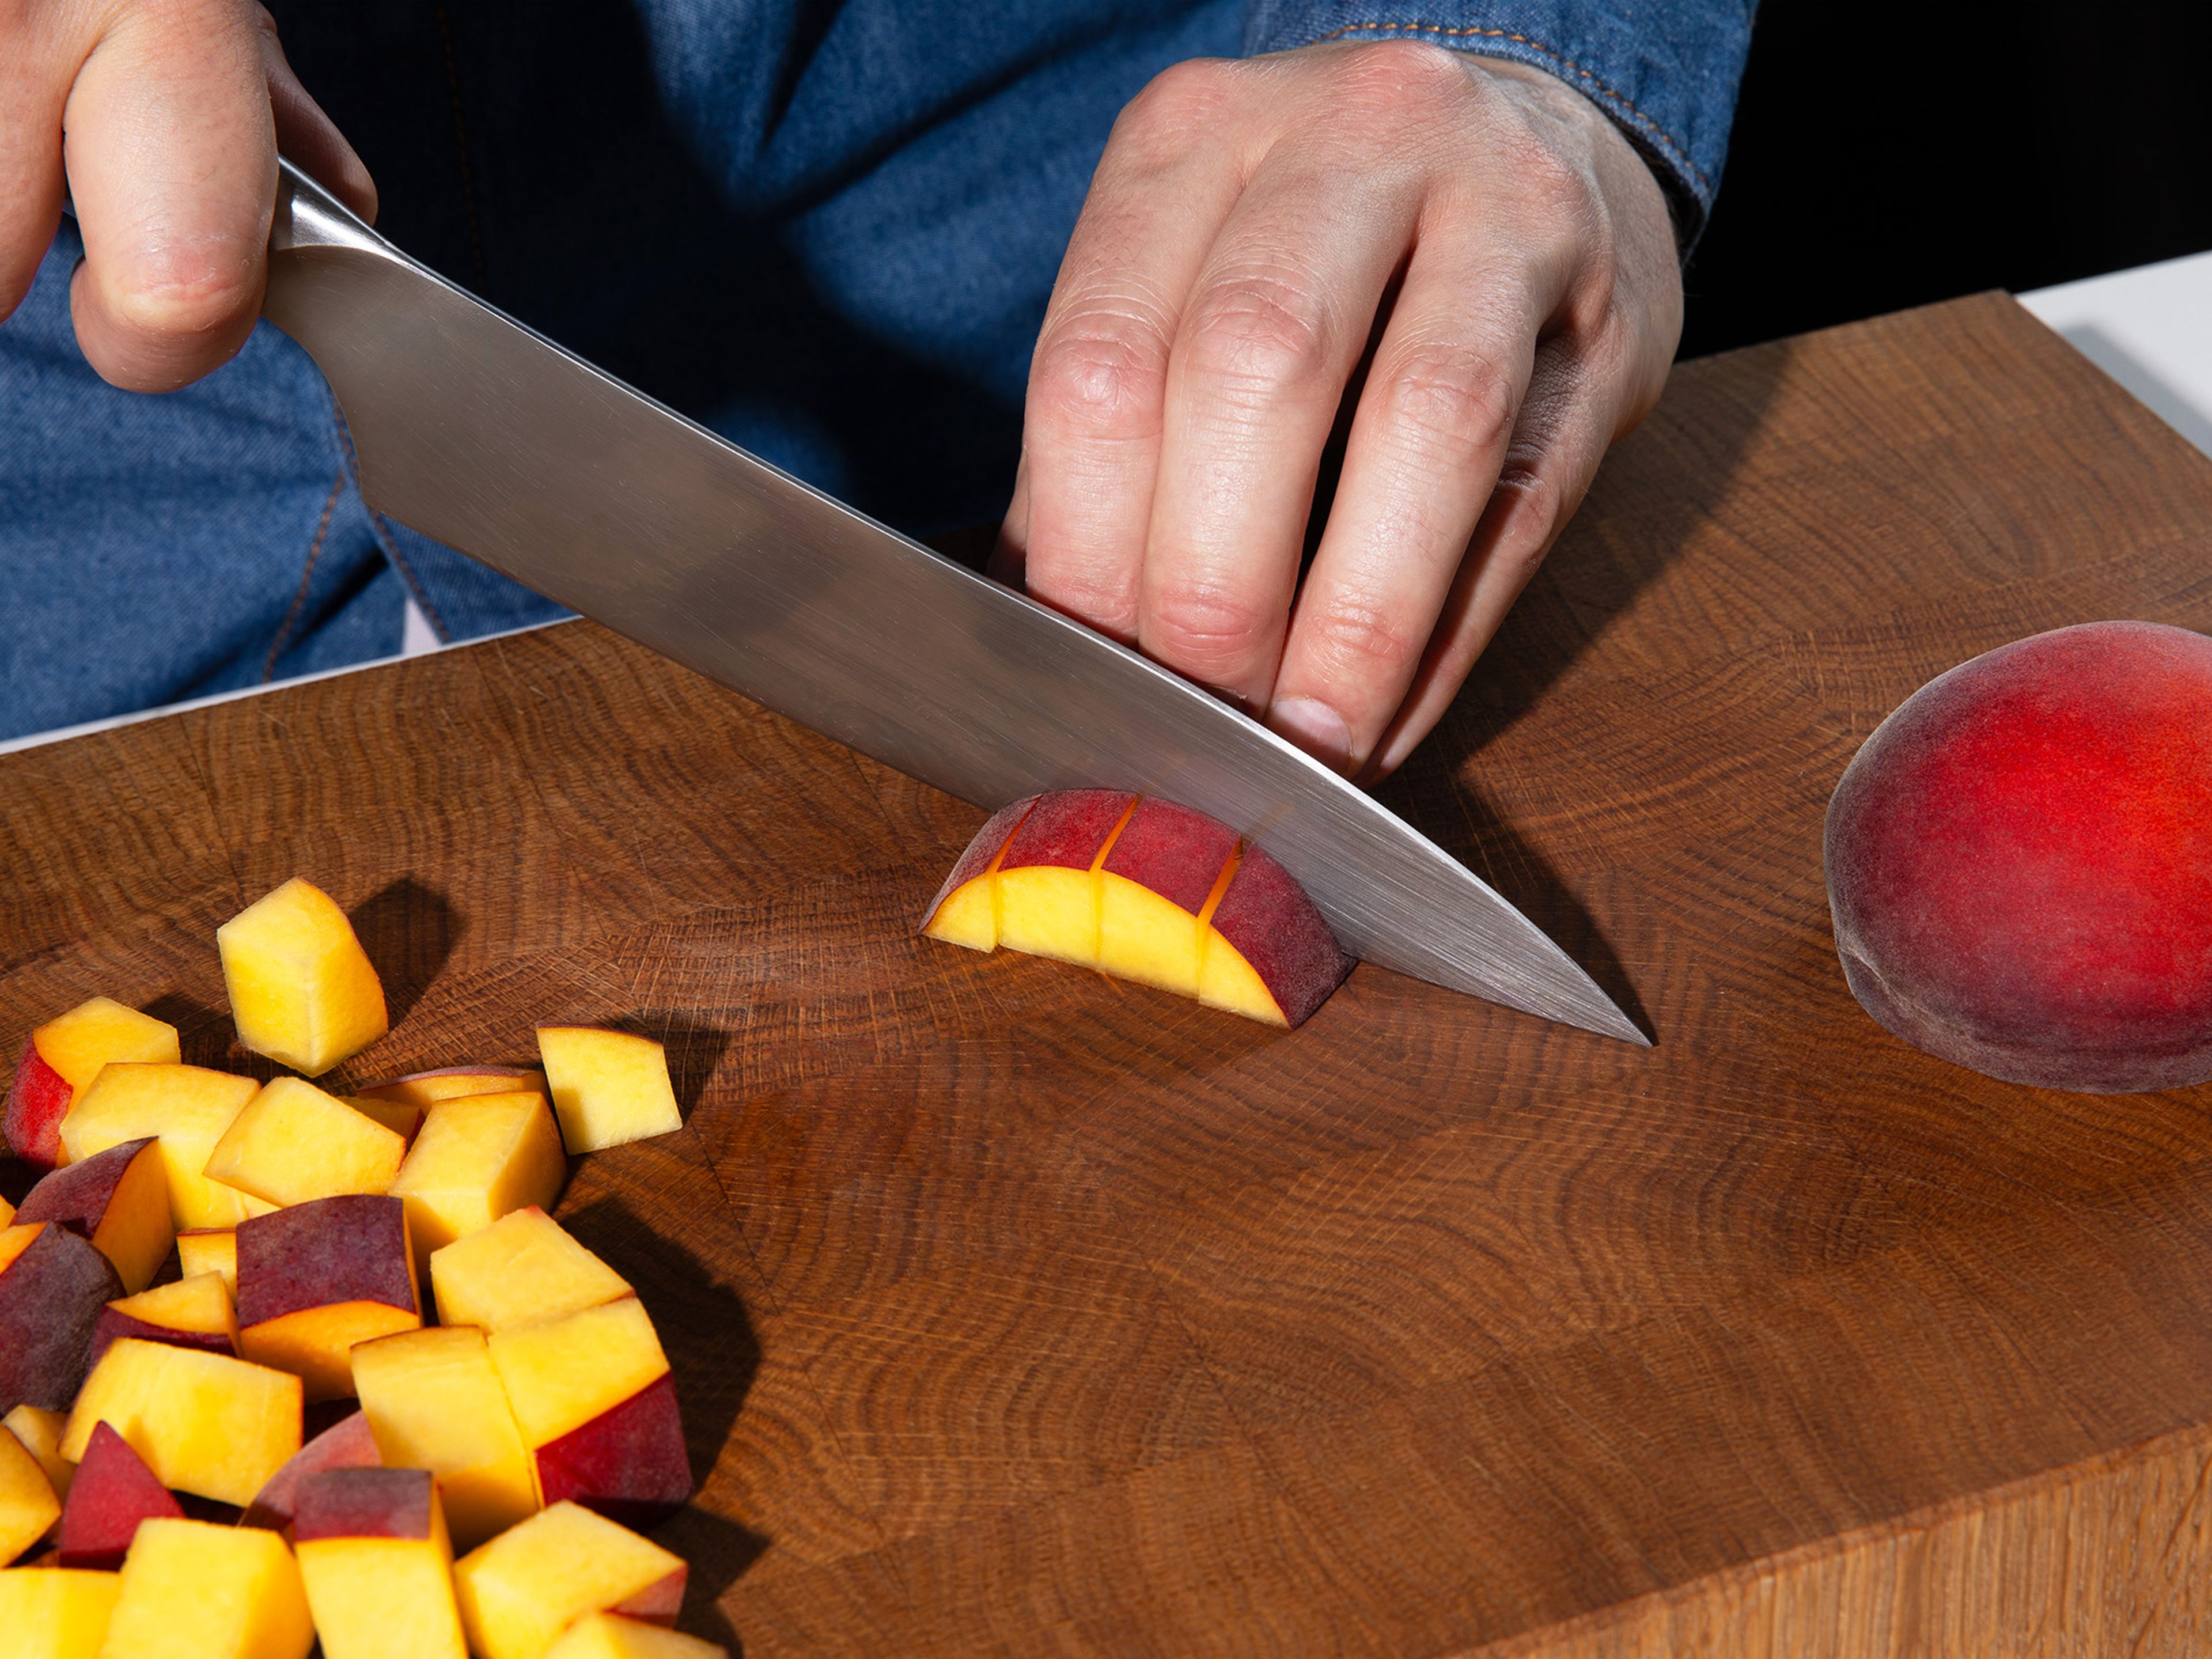 Remove pit and roughly chop most of the peaches. Set aside one peach for garnish and slice into half-moons.